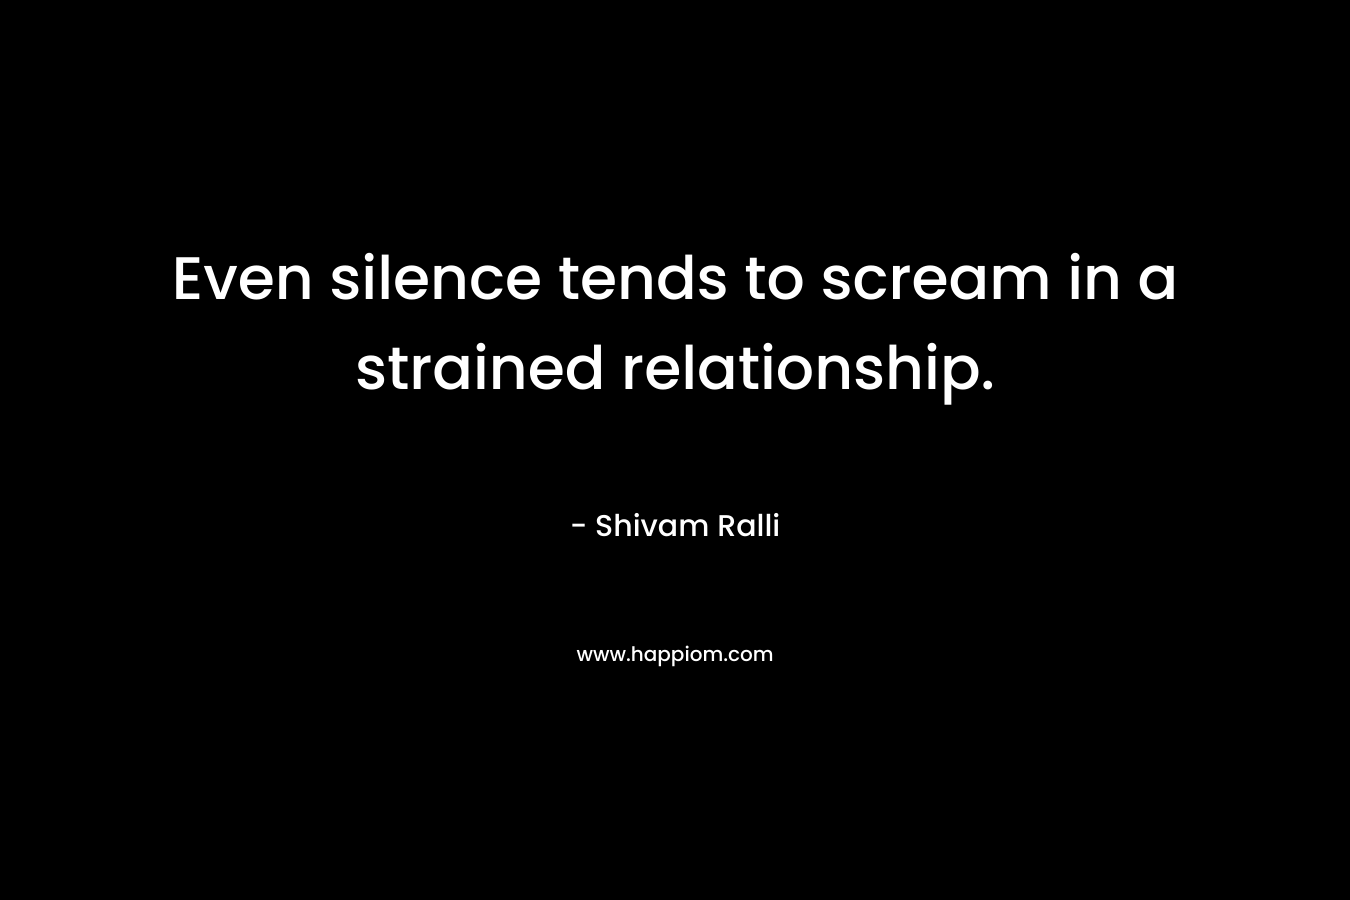 Even silence tends to scream in a strained relationship.